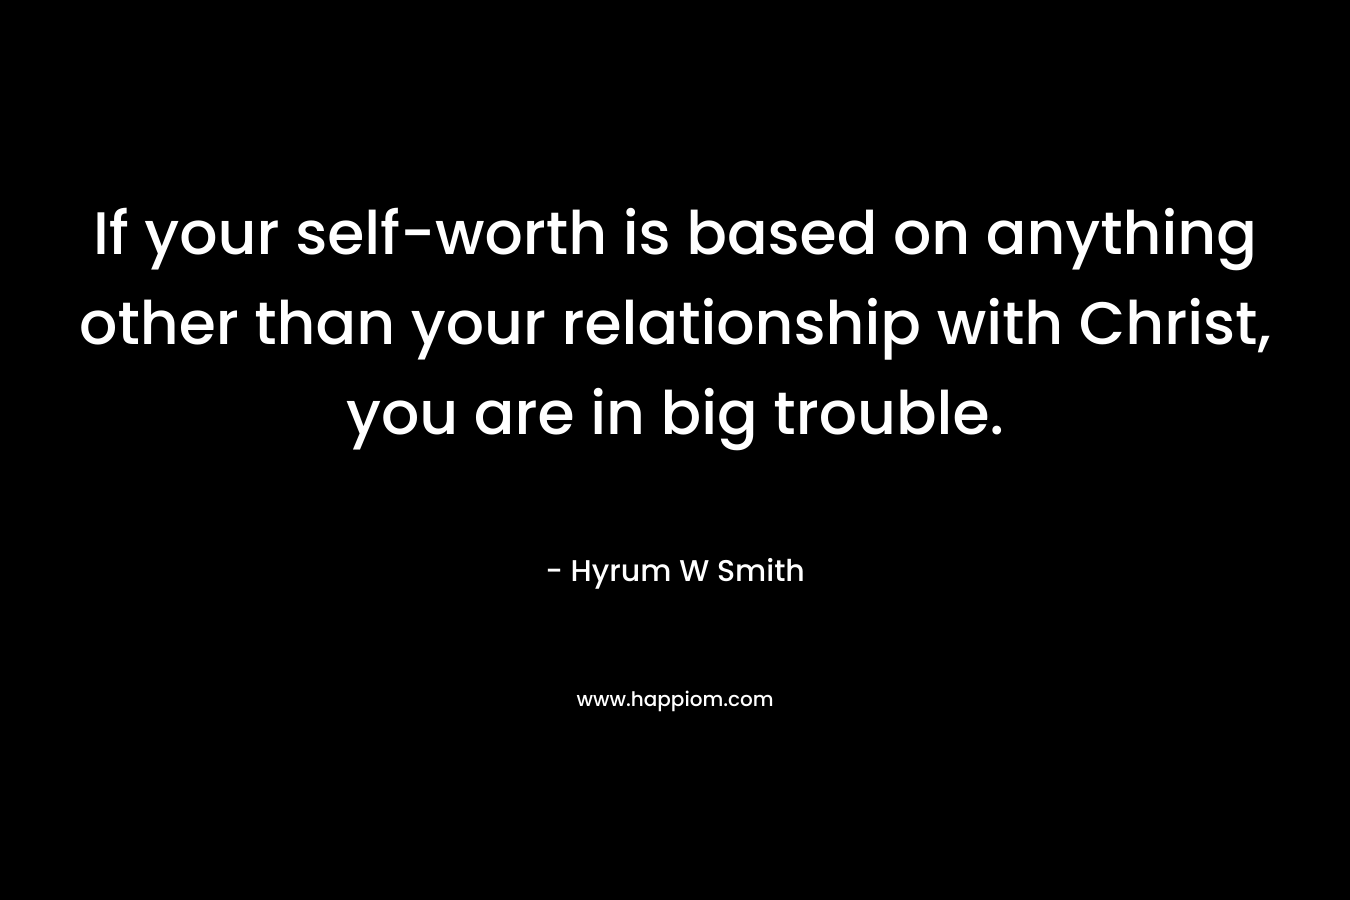 If your self-worth is based on anything other than your relationship with Christ, you are in big trouble. – Hyrum W Smith